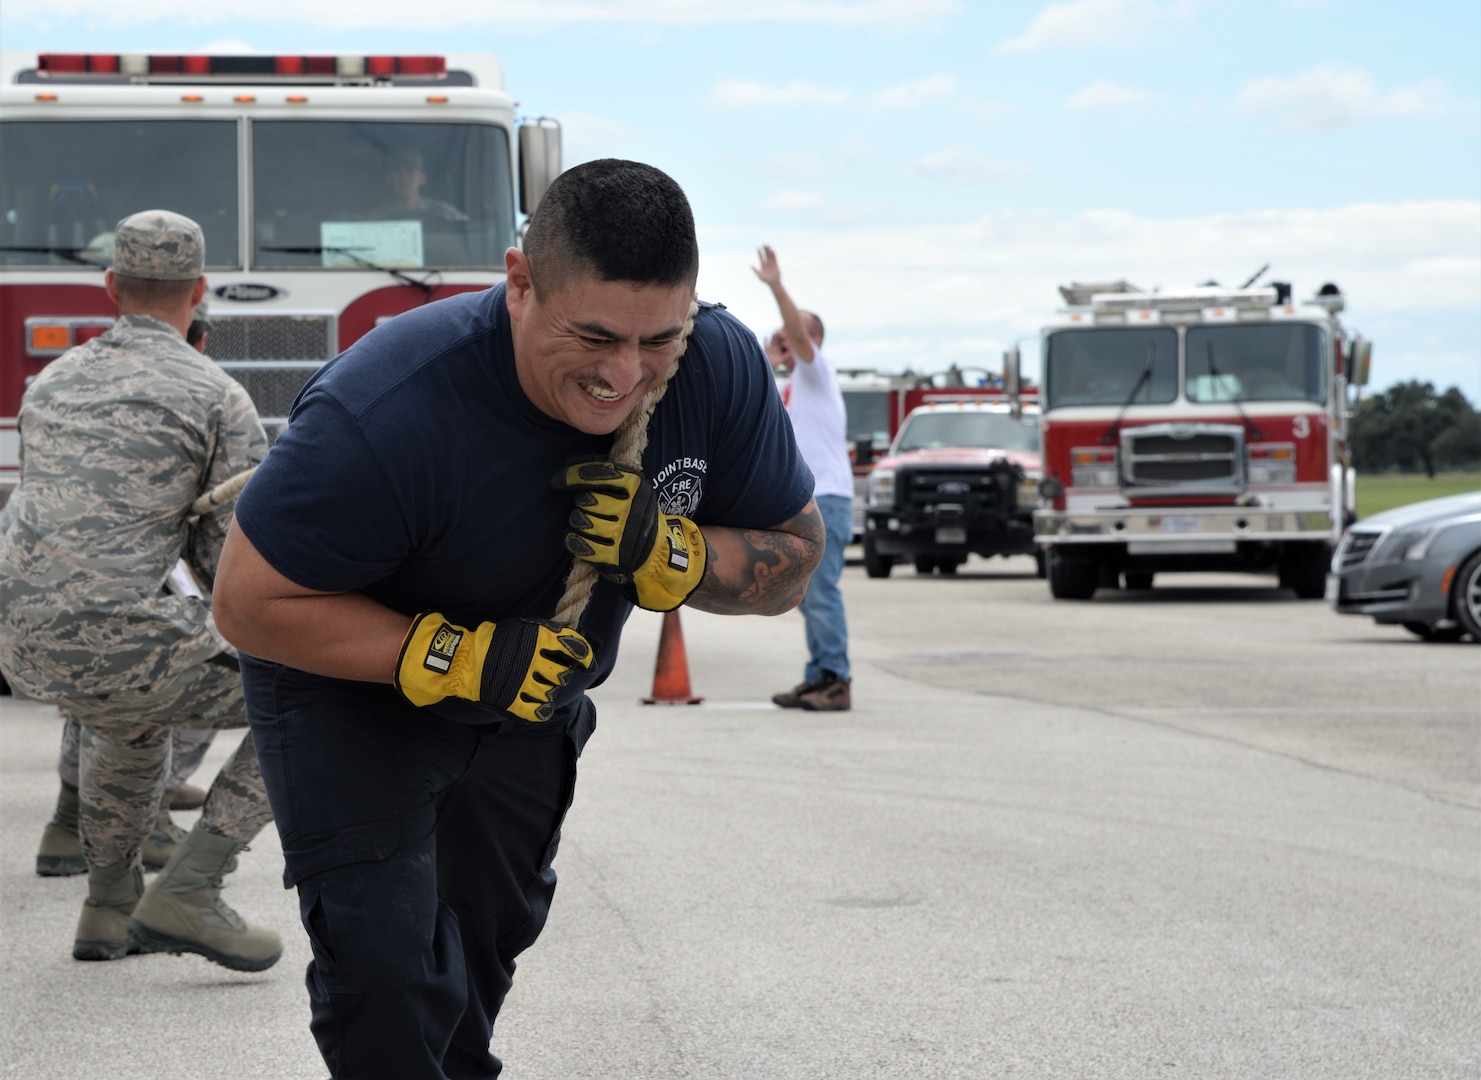 Ramiro Camarillo, 502nd Civil Engineer Squadron lead firefighter, and 502nd CES firefighters pull a fire truck Oct. 20, 2018, during the final challenge of the 2018 Battle of the Badges at Joint Base San Antonio-Randolph. Battle of the Badges takes place each year to build camaraderie, espirit de corps and cohesion among JBSA first responders through various competitive challenges taken from their daily missions.